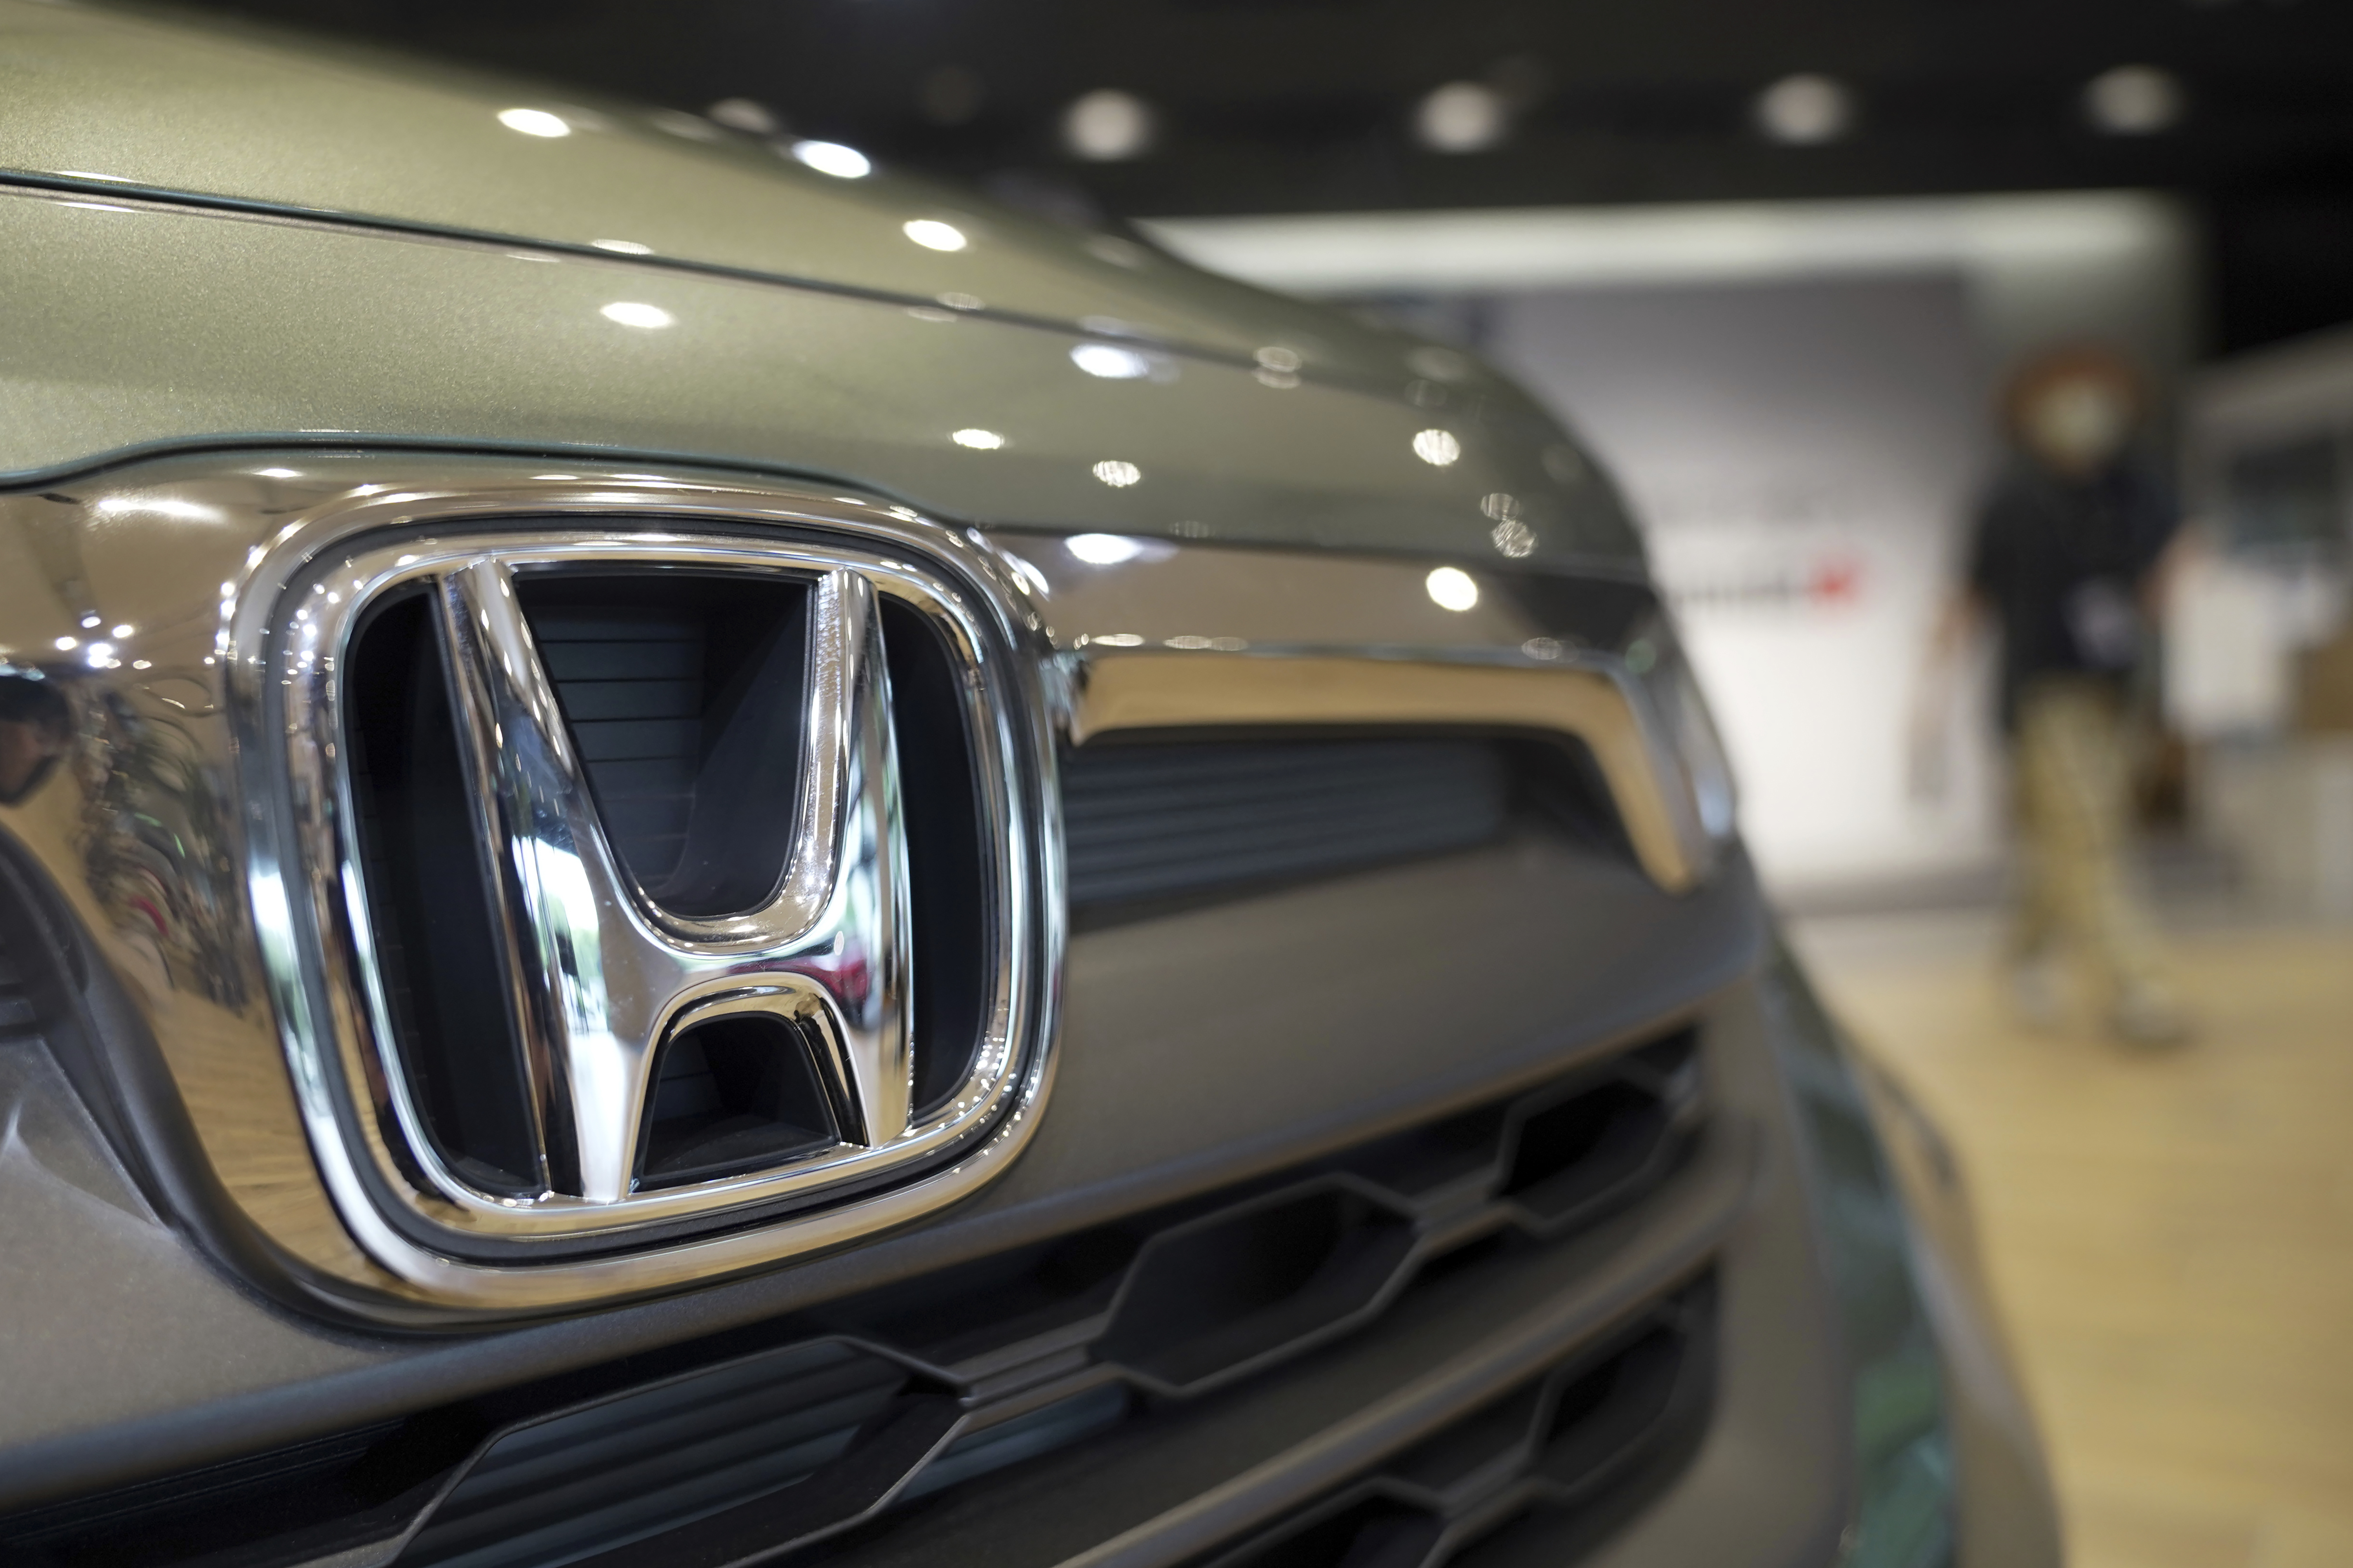 Honda recalls nearly 67K vehicles in Canada over faulty airbag sensors